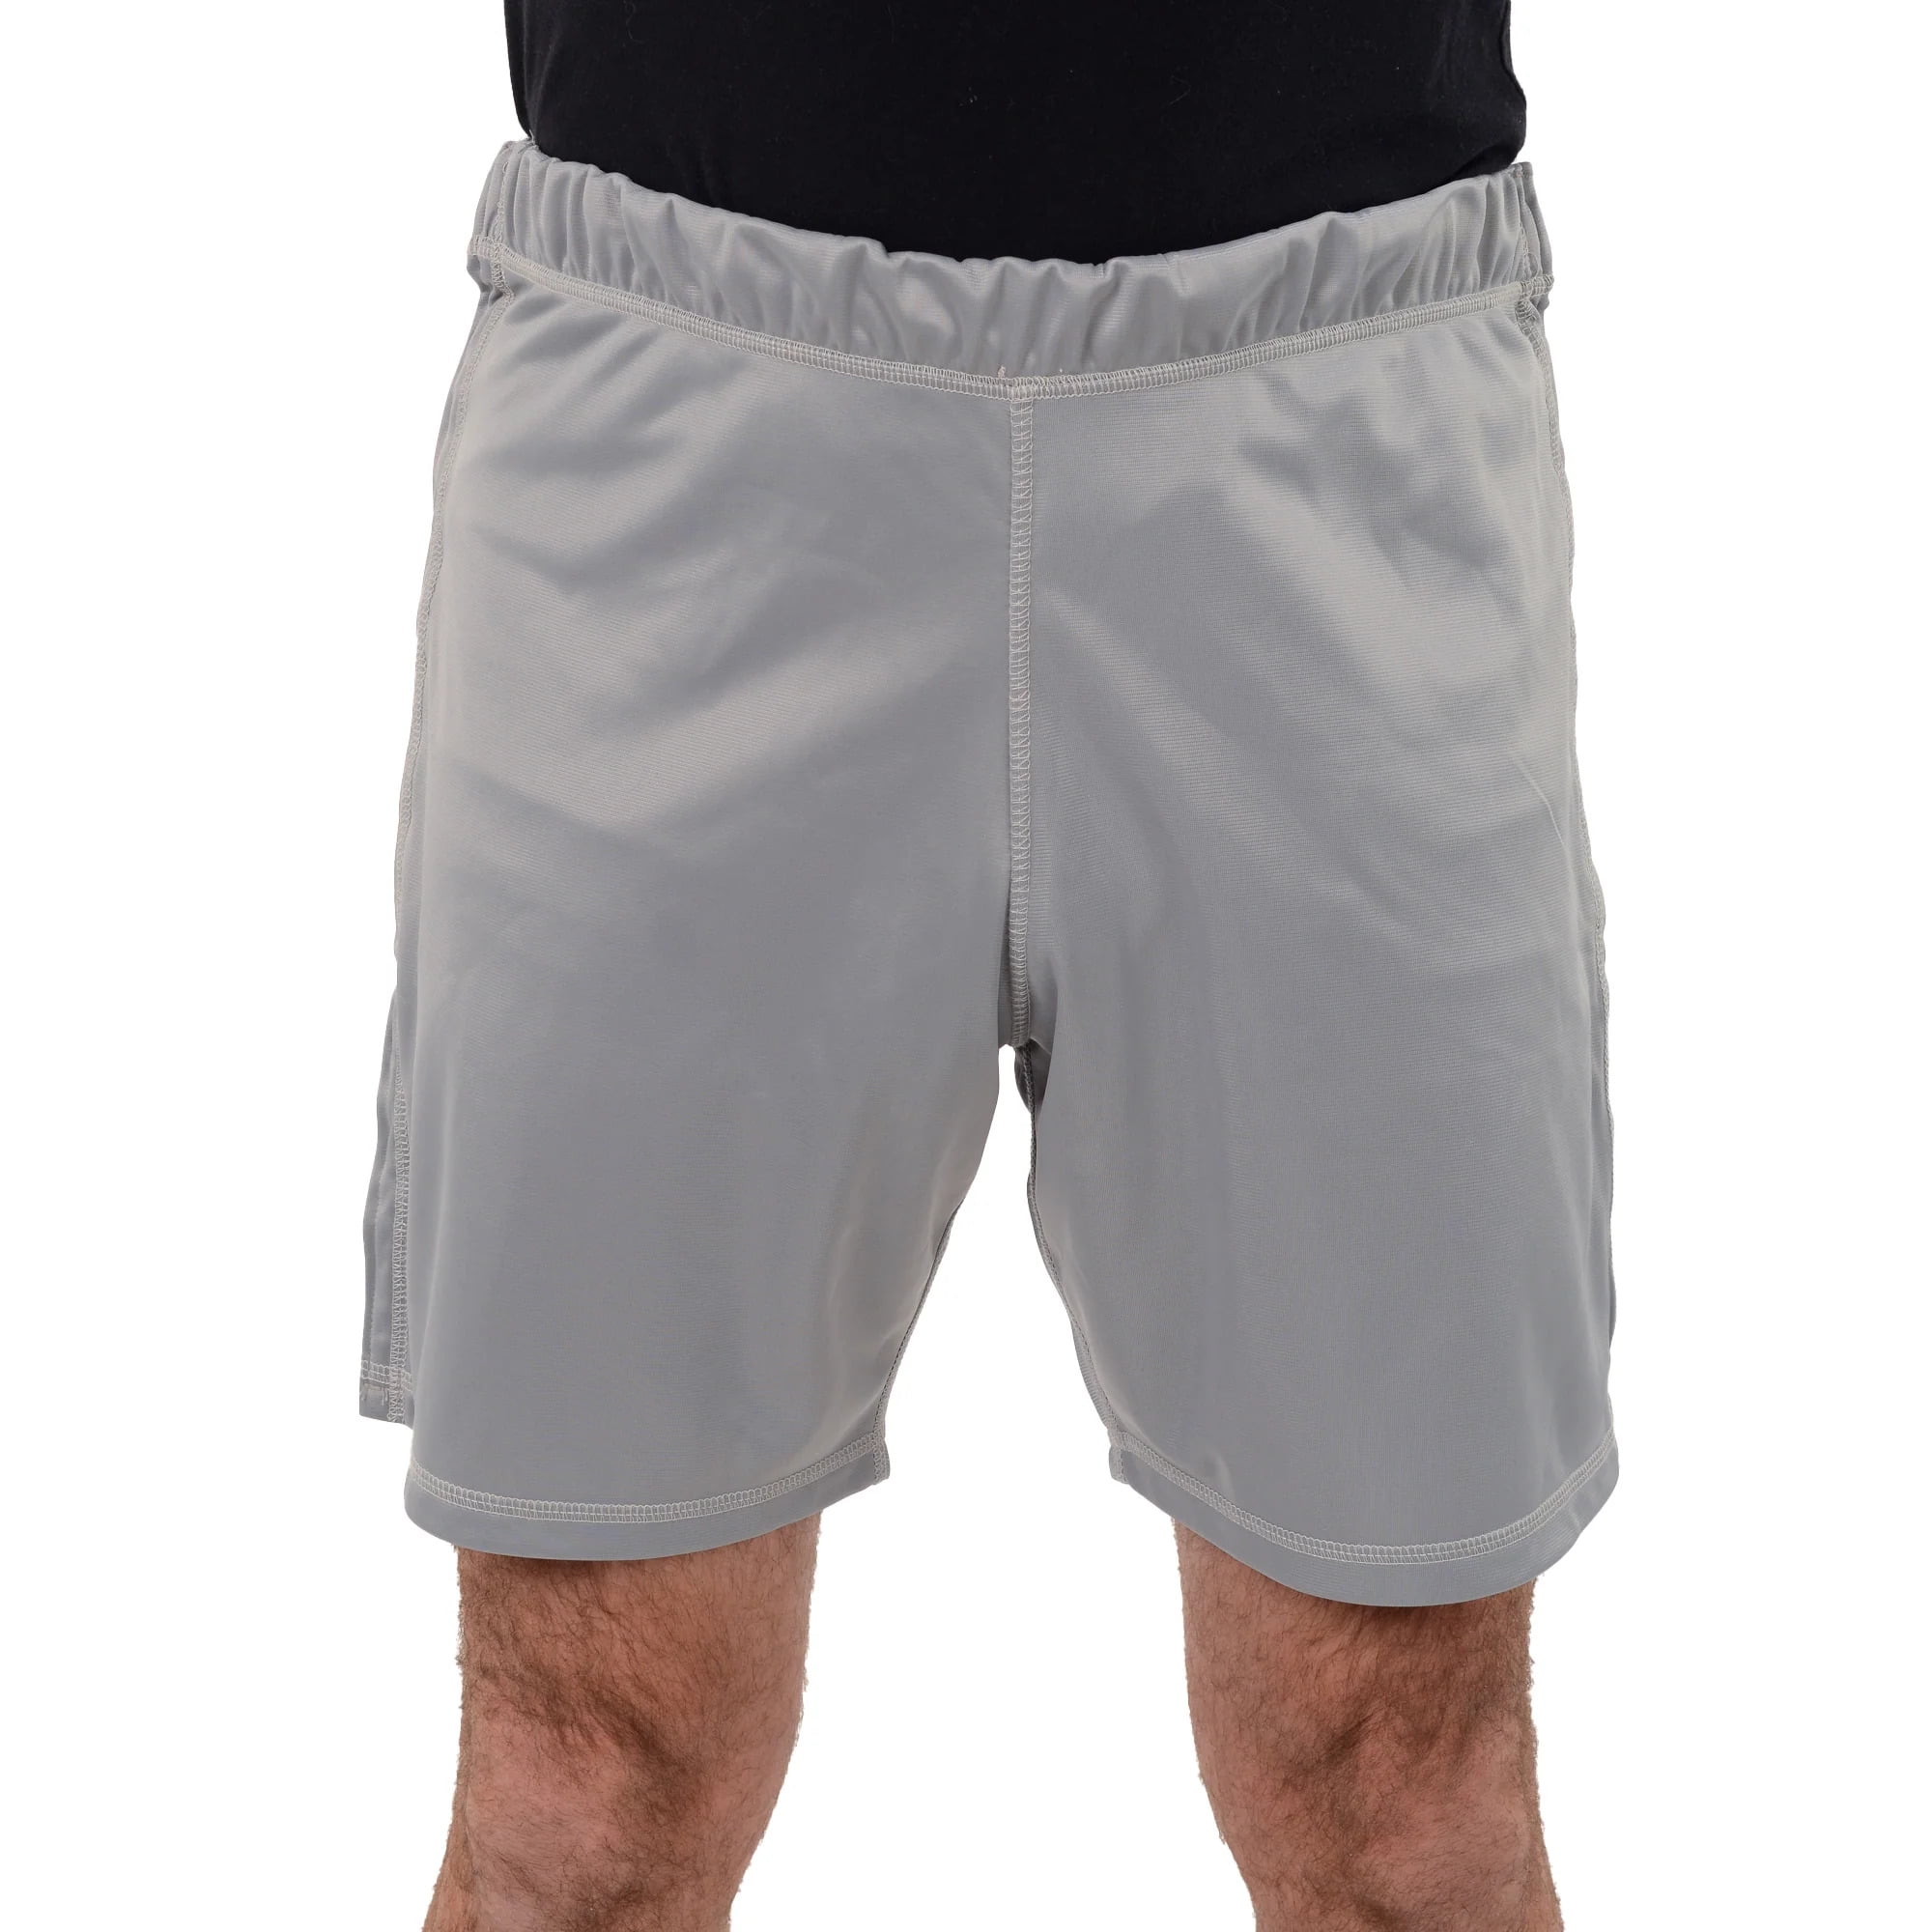 Post Medical Surgery Specialize Tearaway recovery shorts Pant for